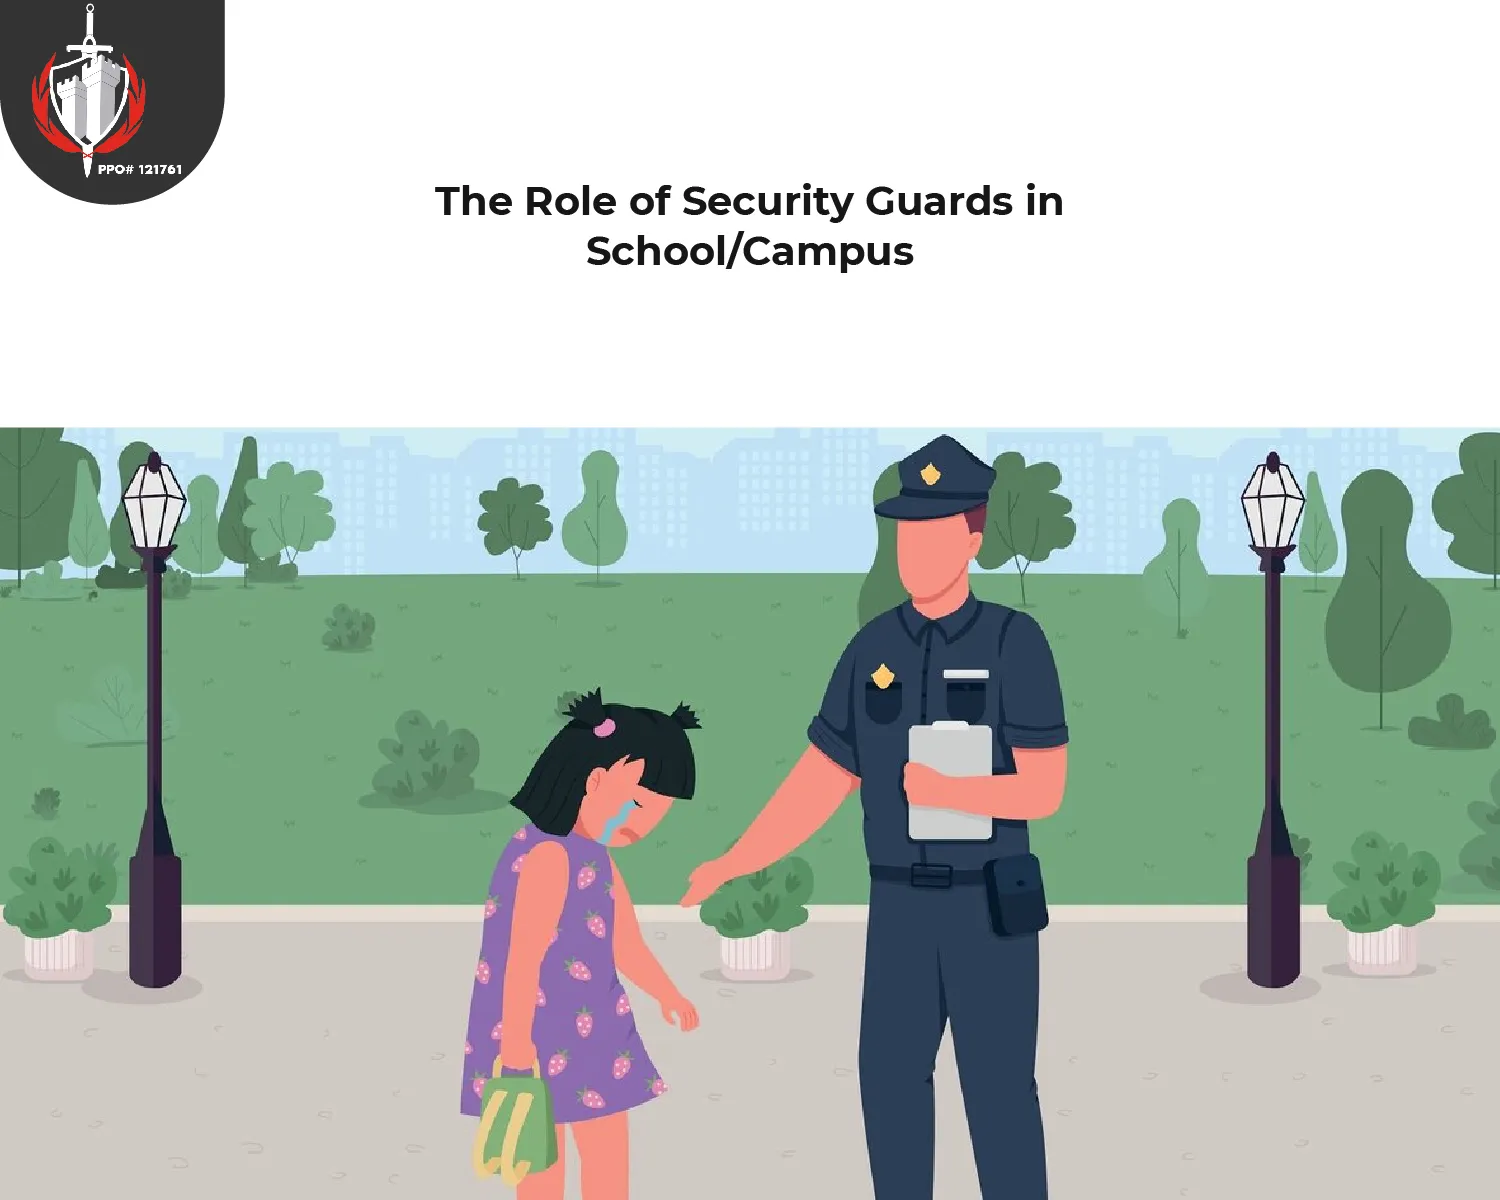 The Role of Security Guards in School/Campus